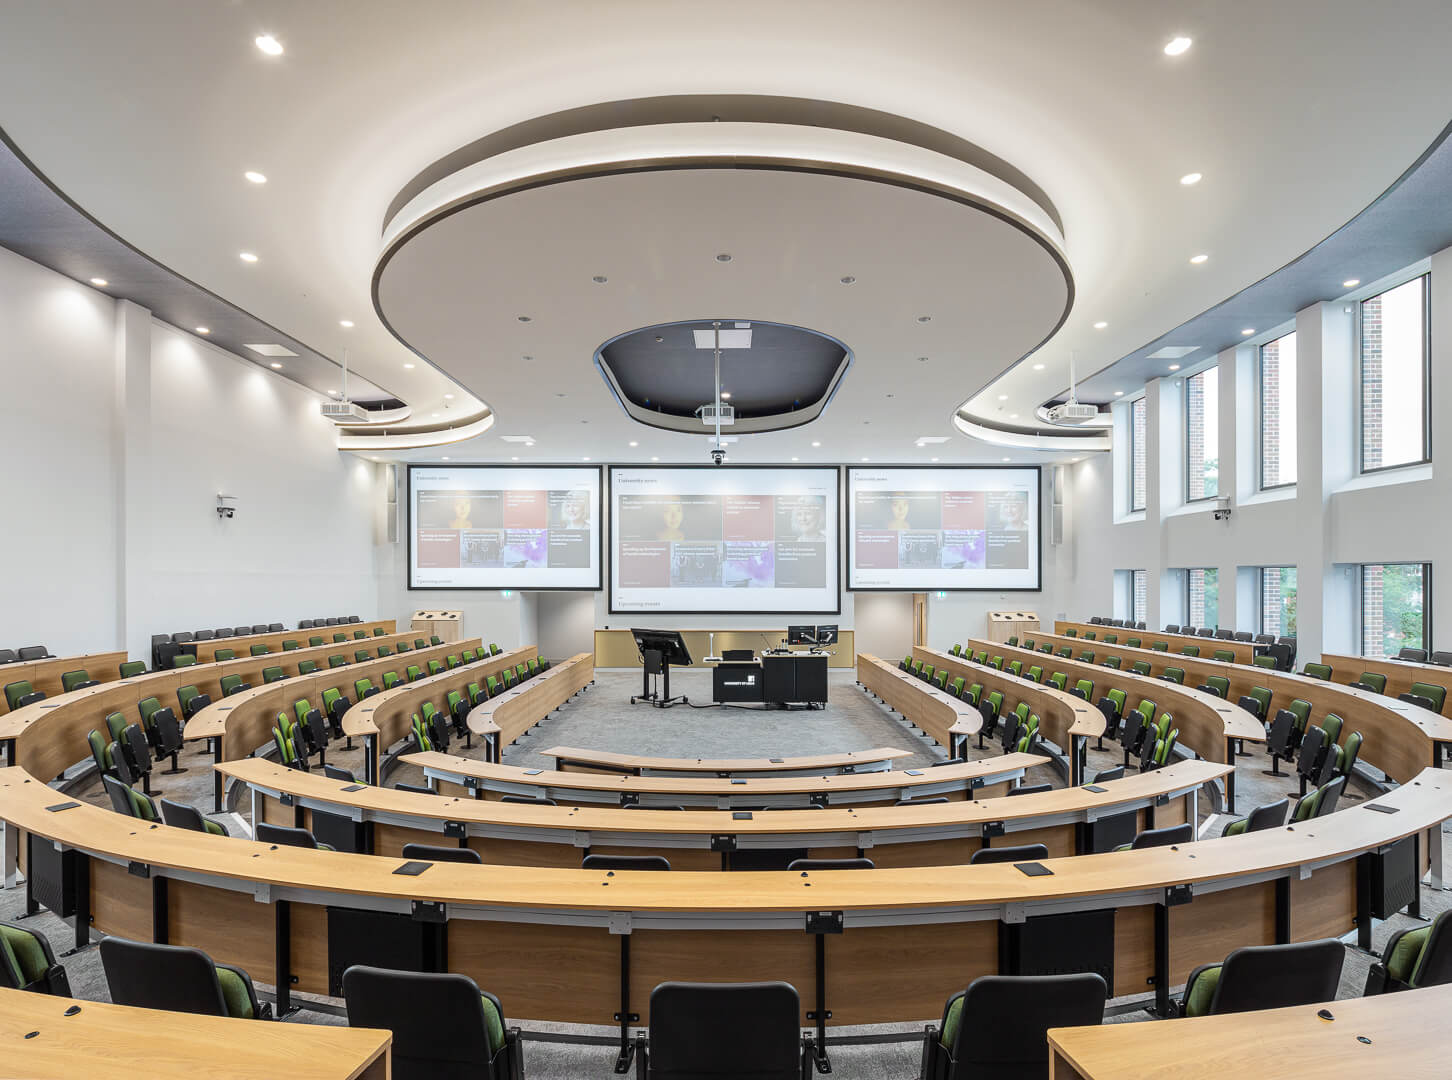 Architectural and interior photography of the newly constructed Esther Simpson Building at University of Leeds